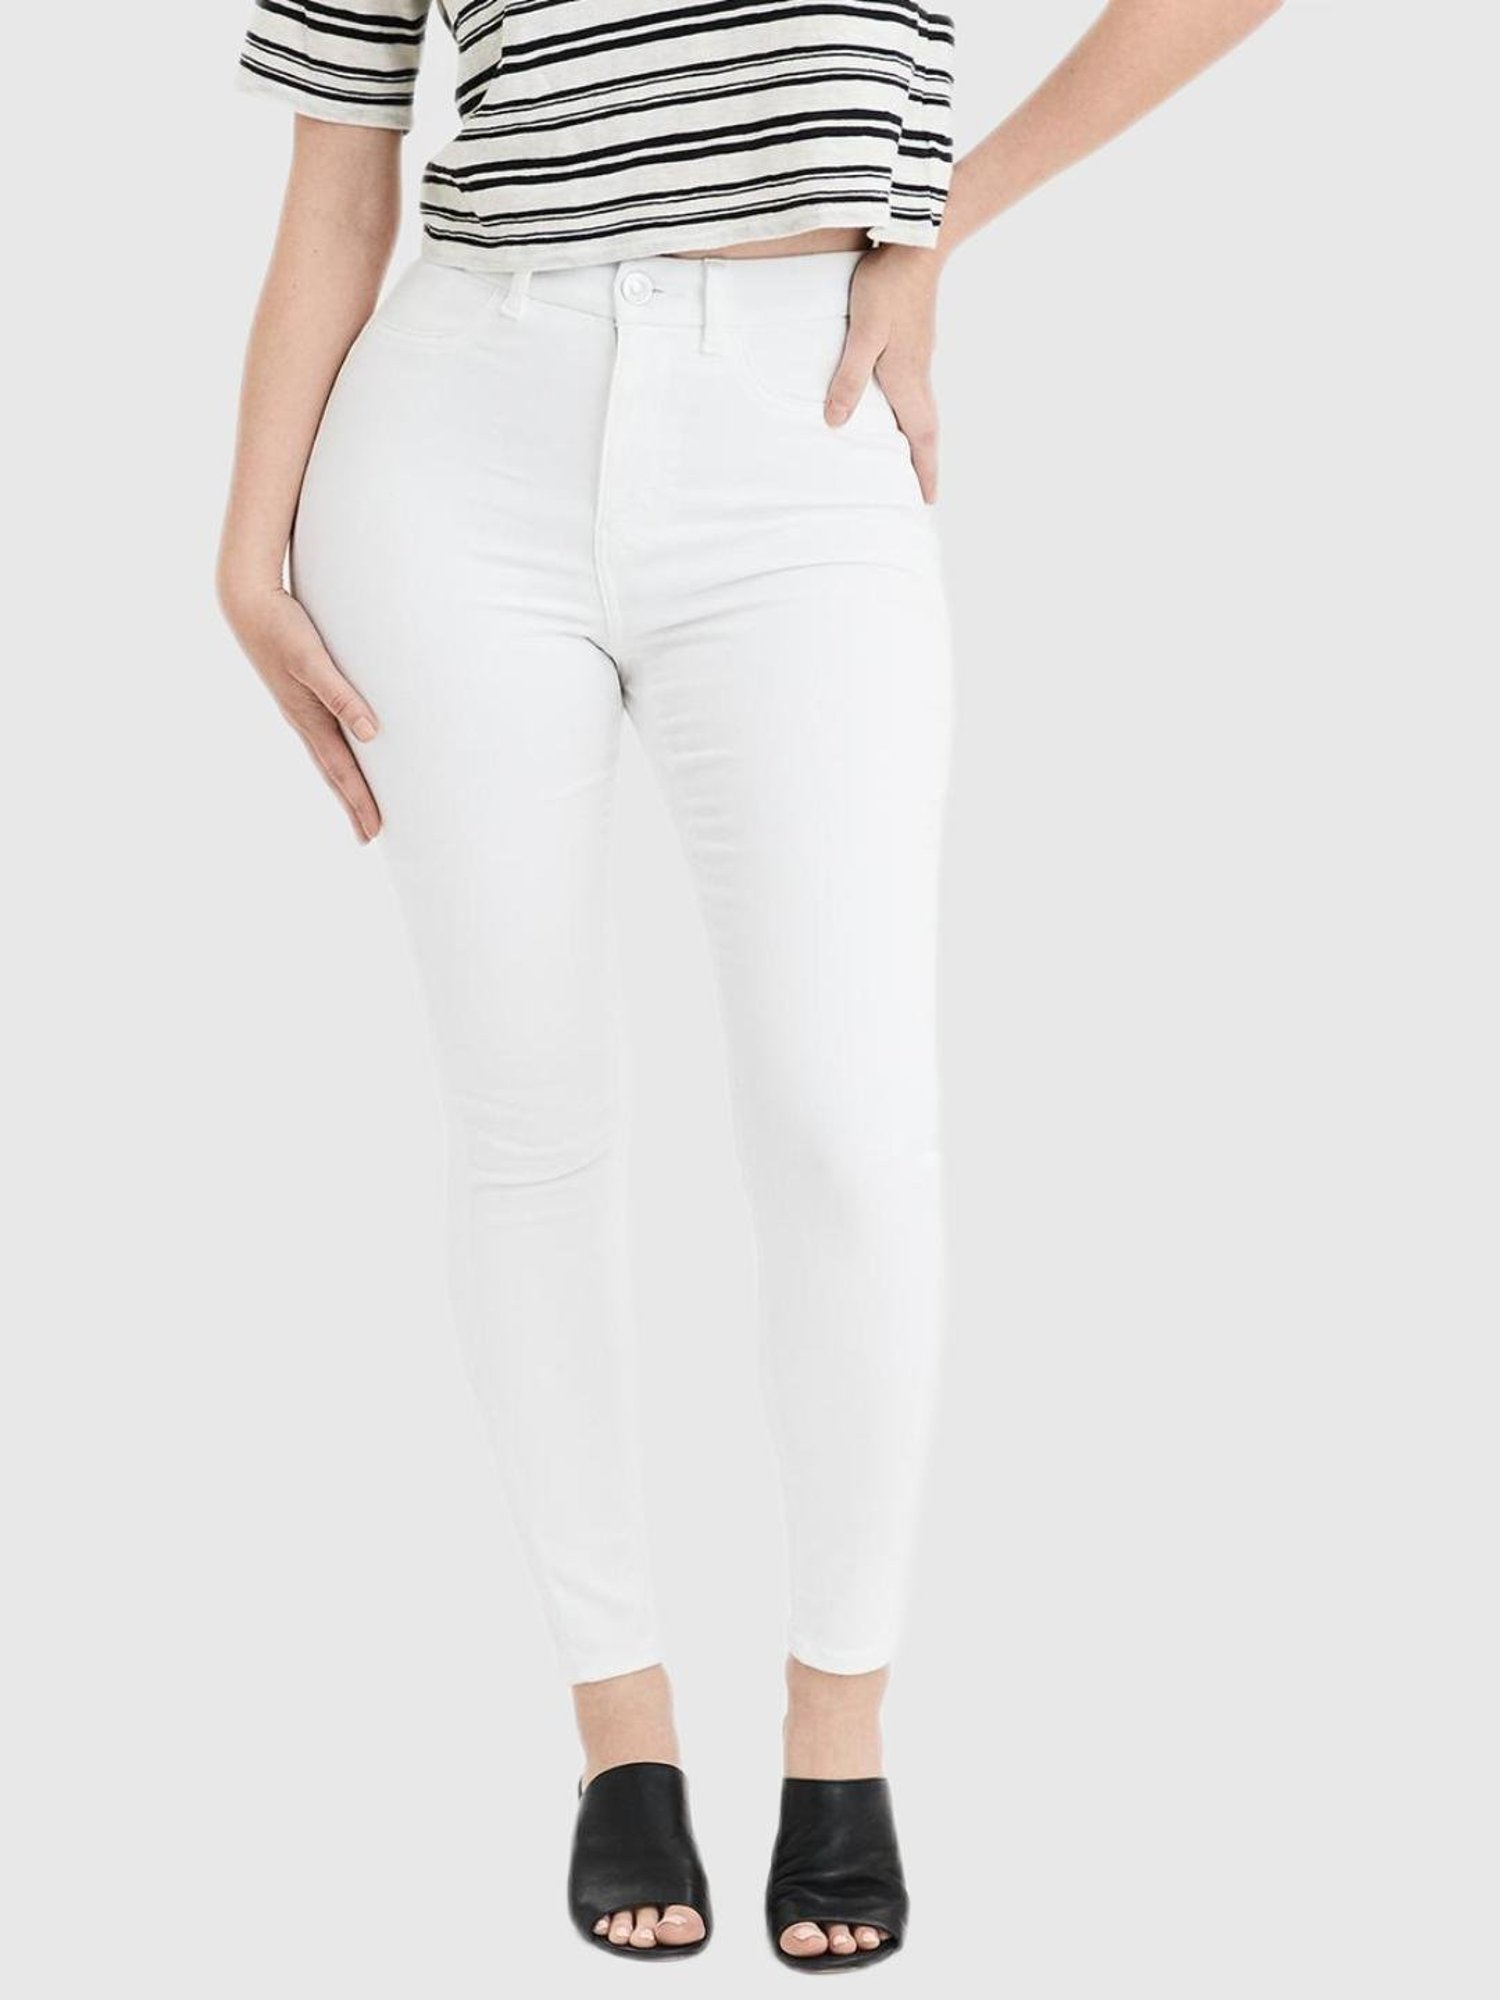 American Eagle Skinny High Rise Jeggings Review  THE JEANS BLOG